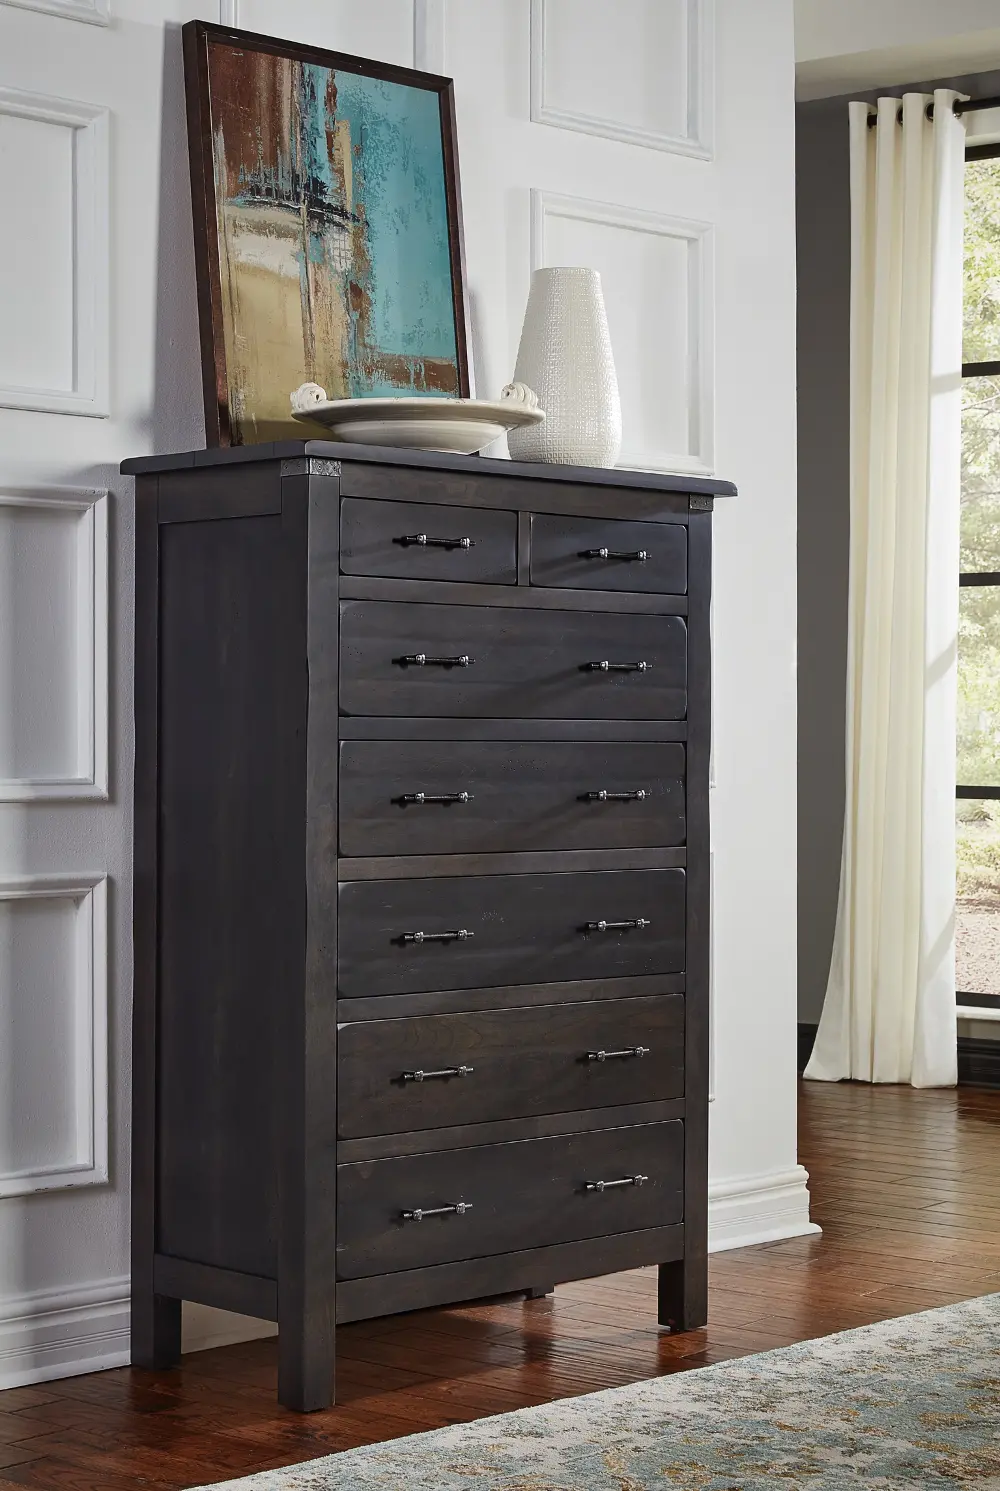 Rustic Classic Distressed Chest of Drawers - Colin-1